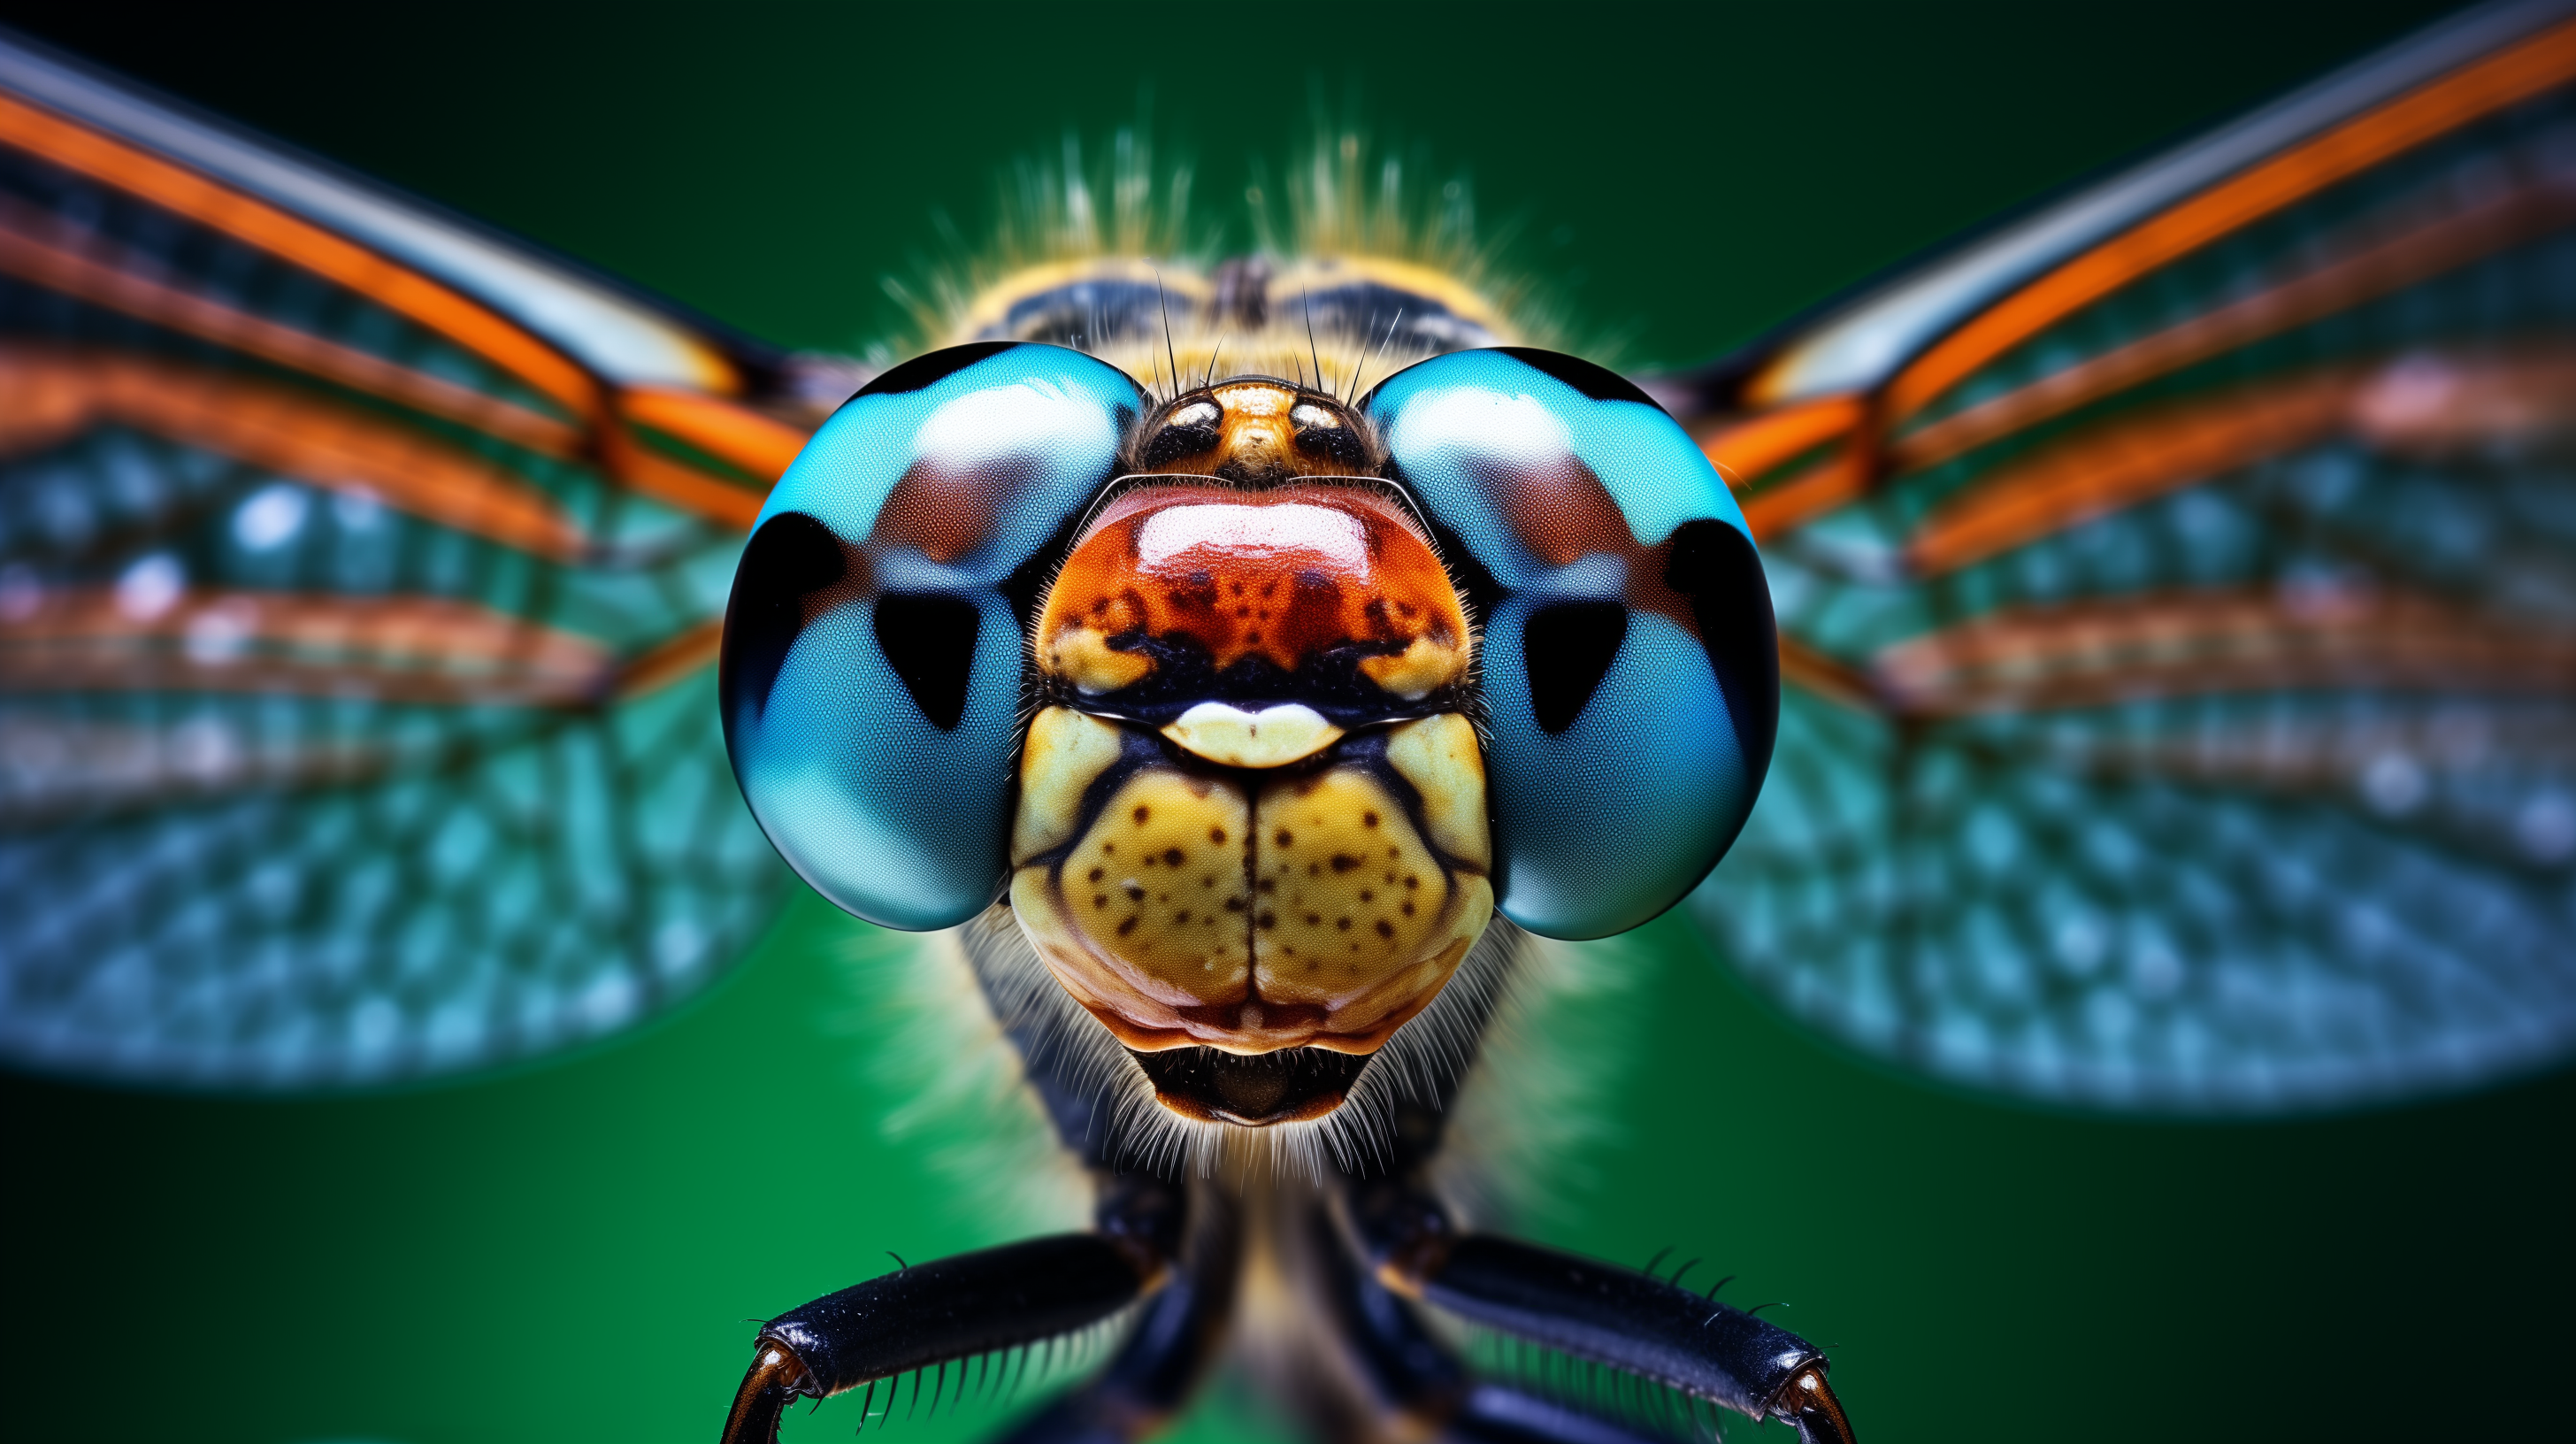 Close-up HD wallpaper of a dragonfly with detailed blue eyes and translucent wings on a blurred green background.